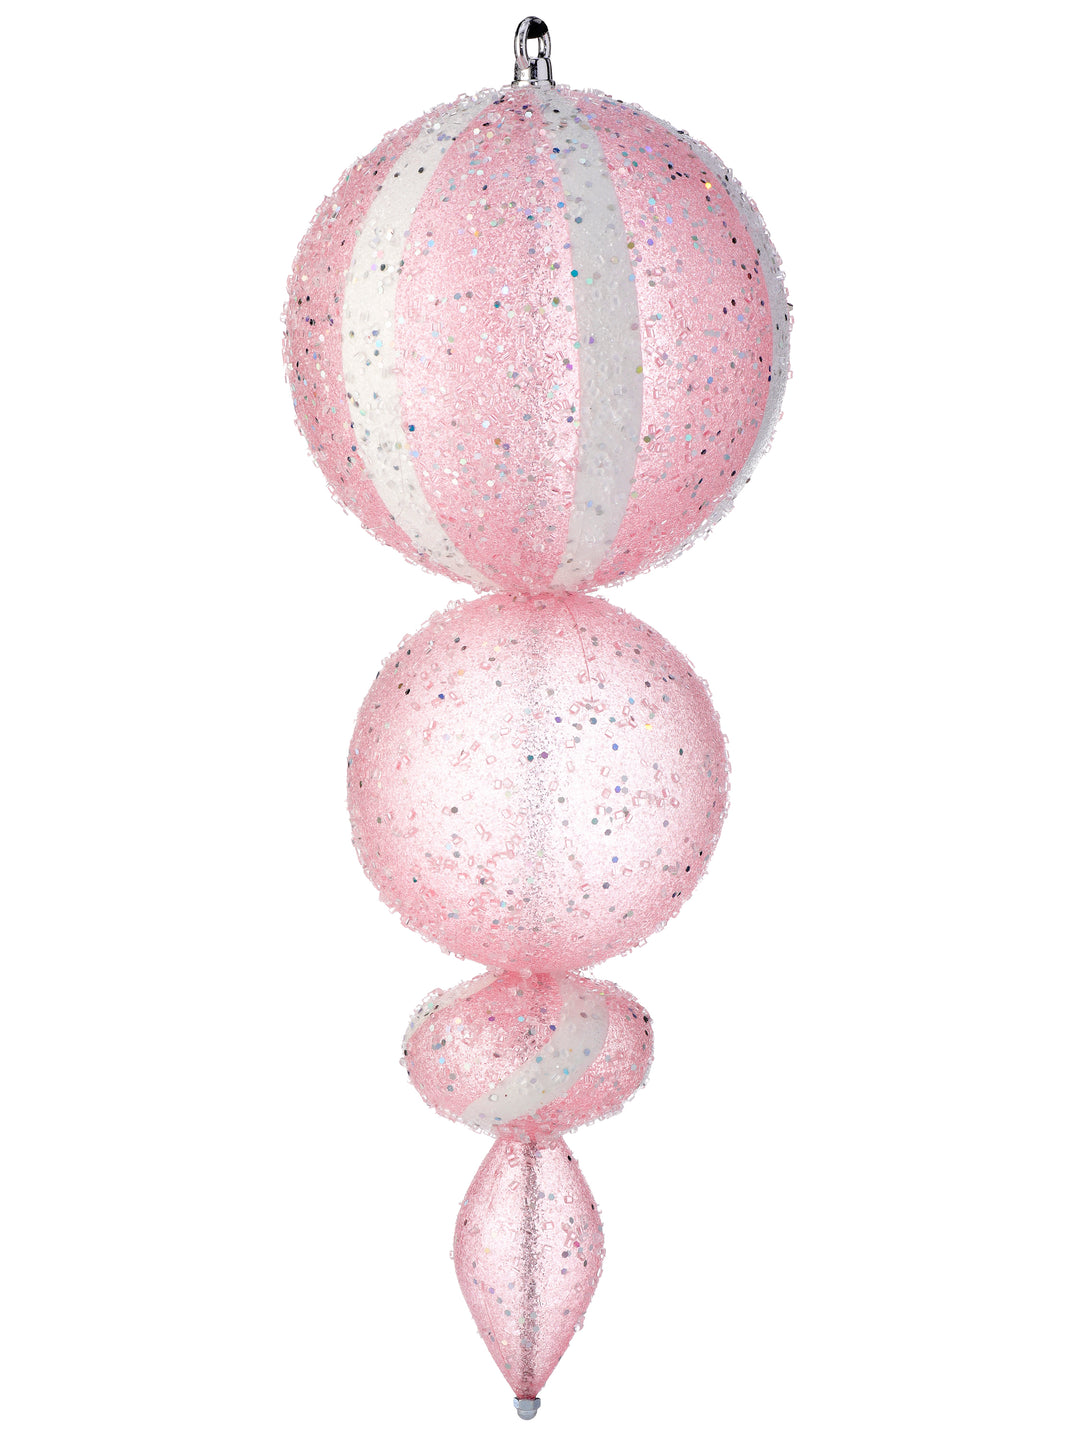 Regency 21" Pink/White Iced Candy Finial Ornament